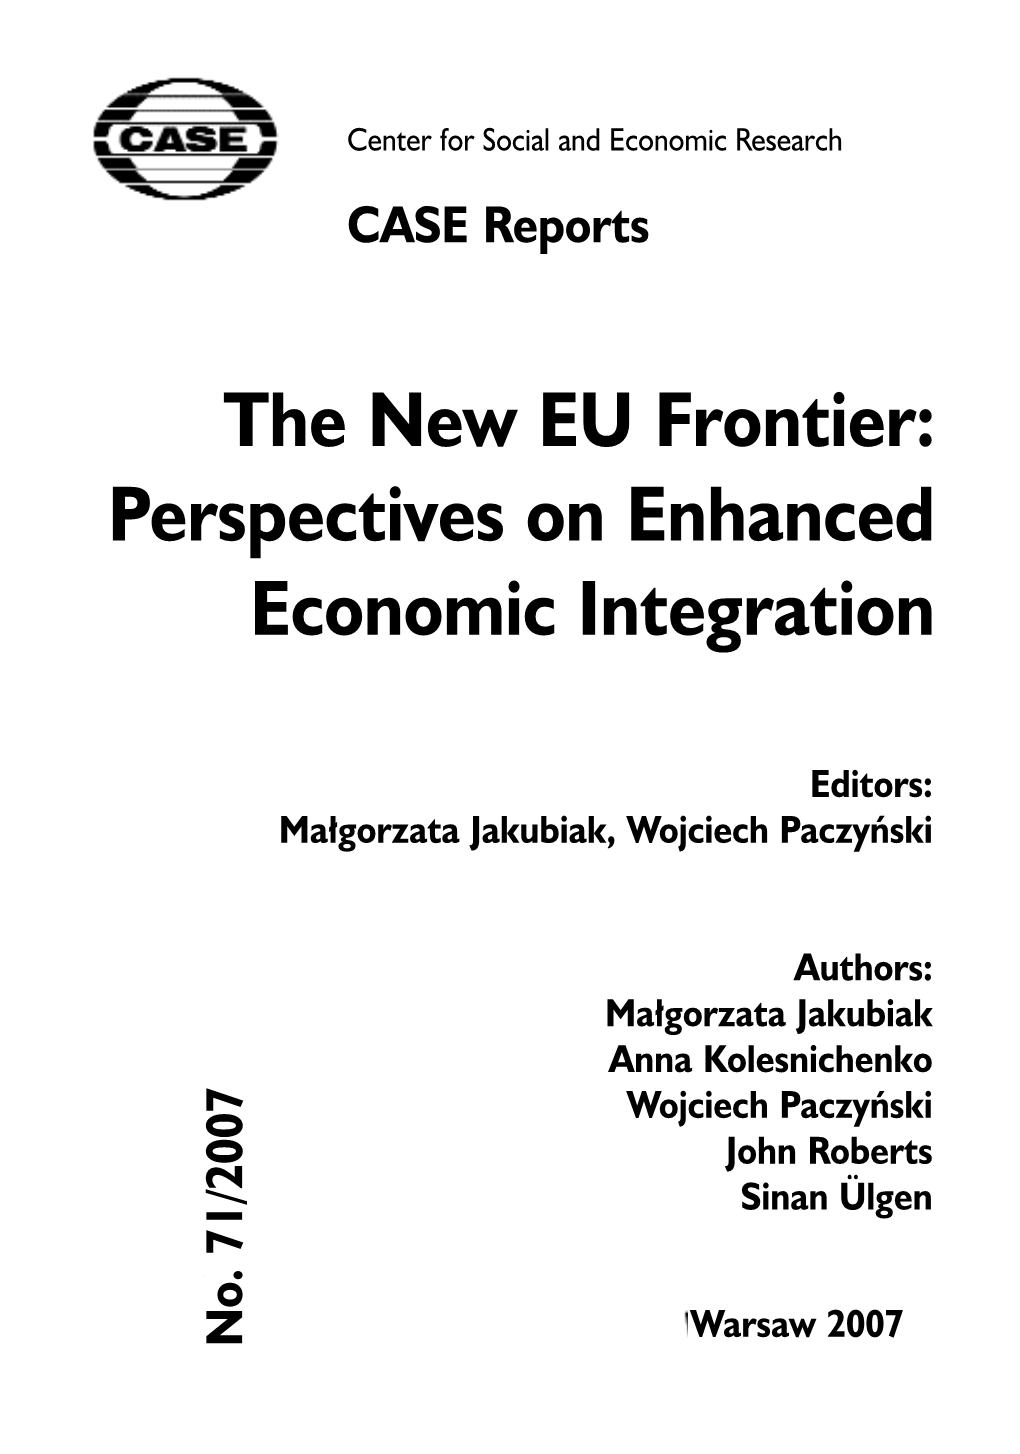 The New EU Frontier: Perspectives on Enhanced Economic Integration